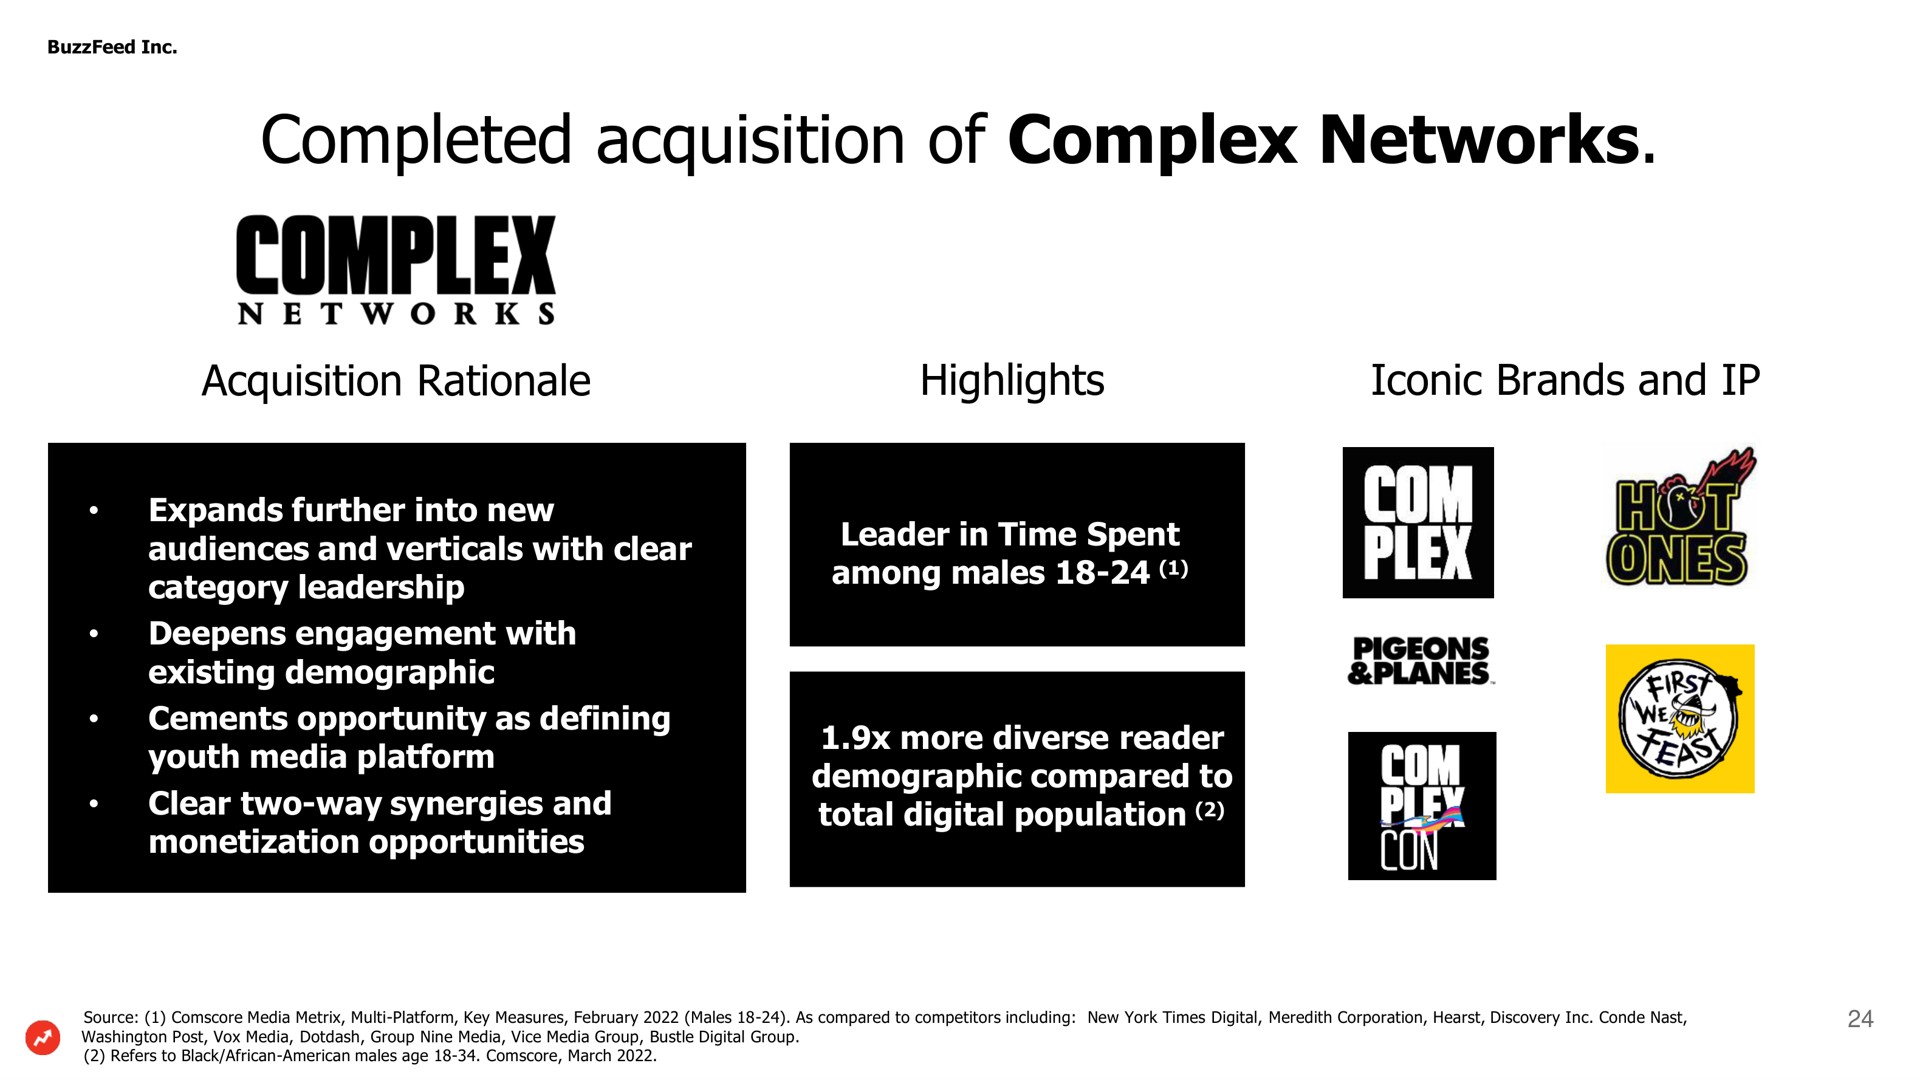 completed acquisition of complex networks | BuzzFeed